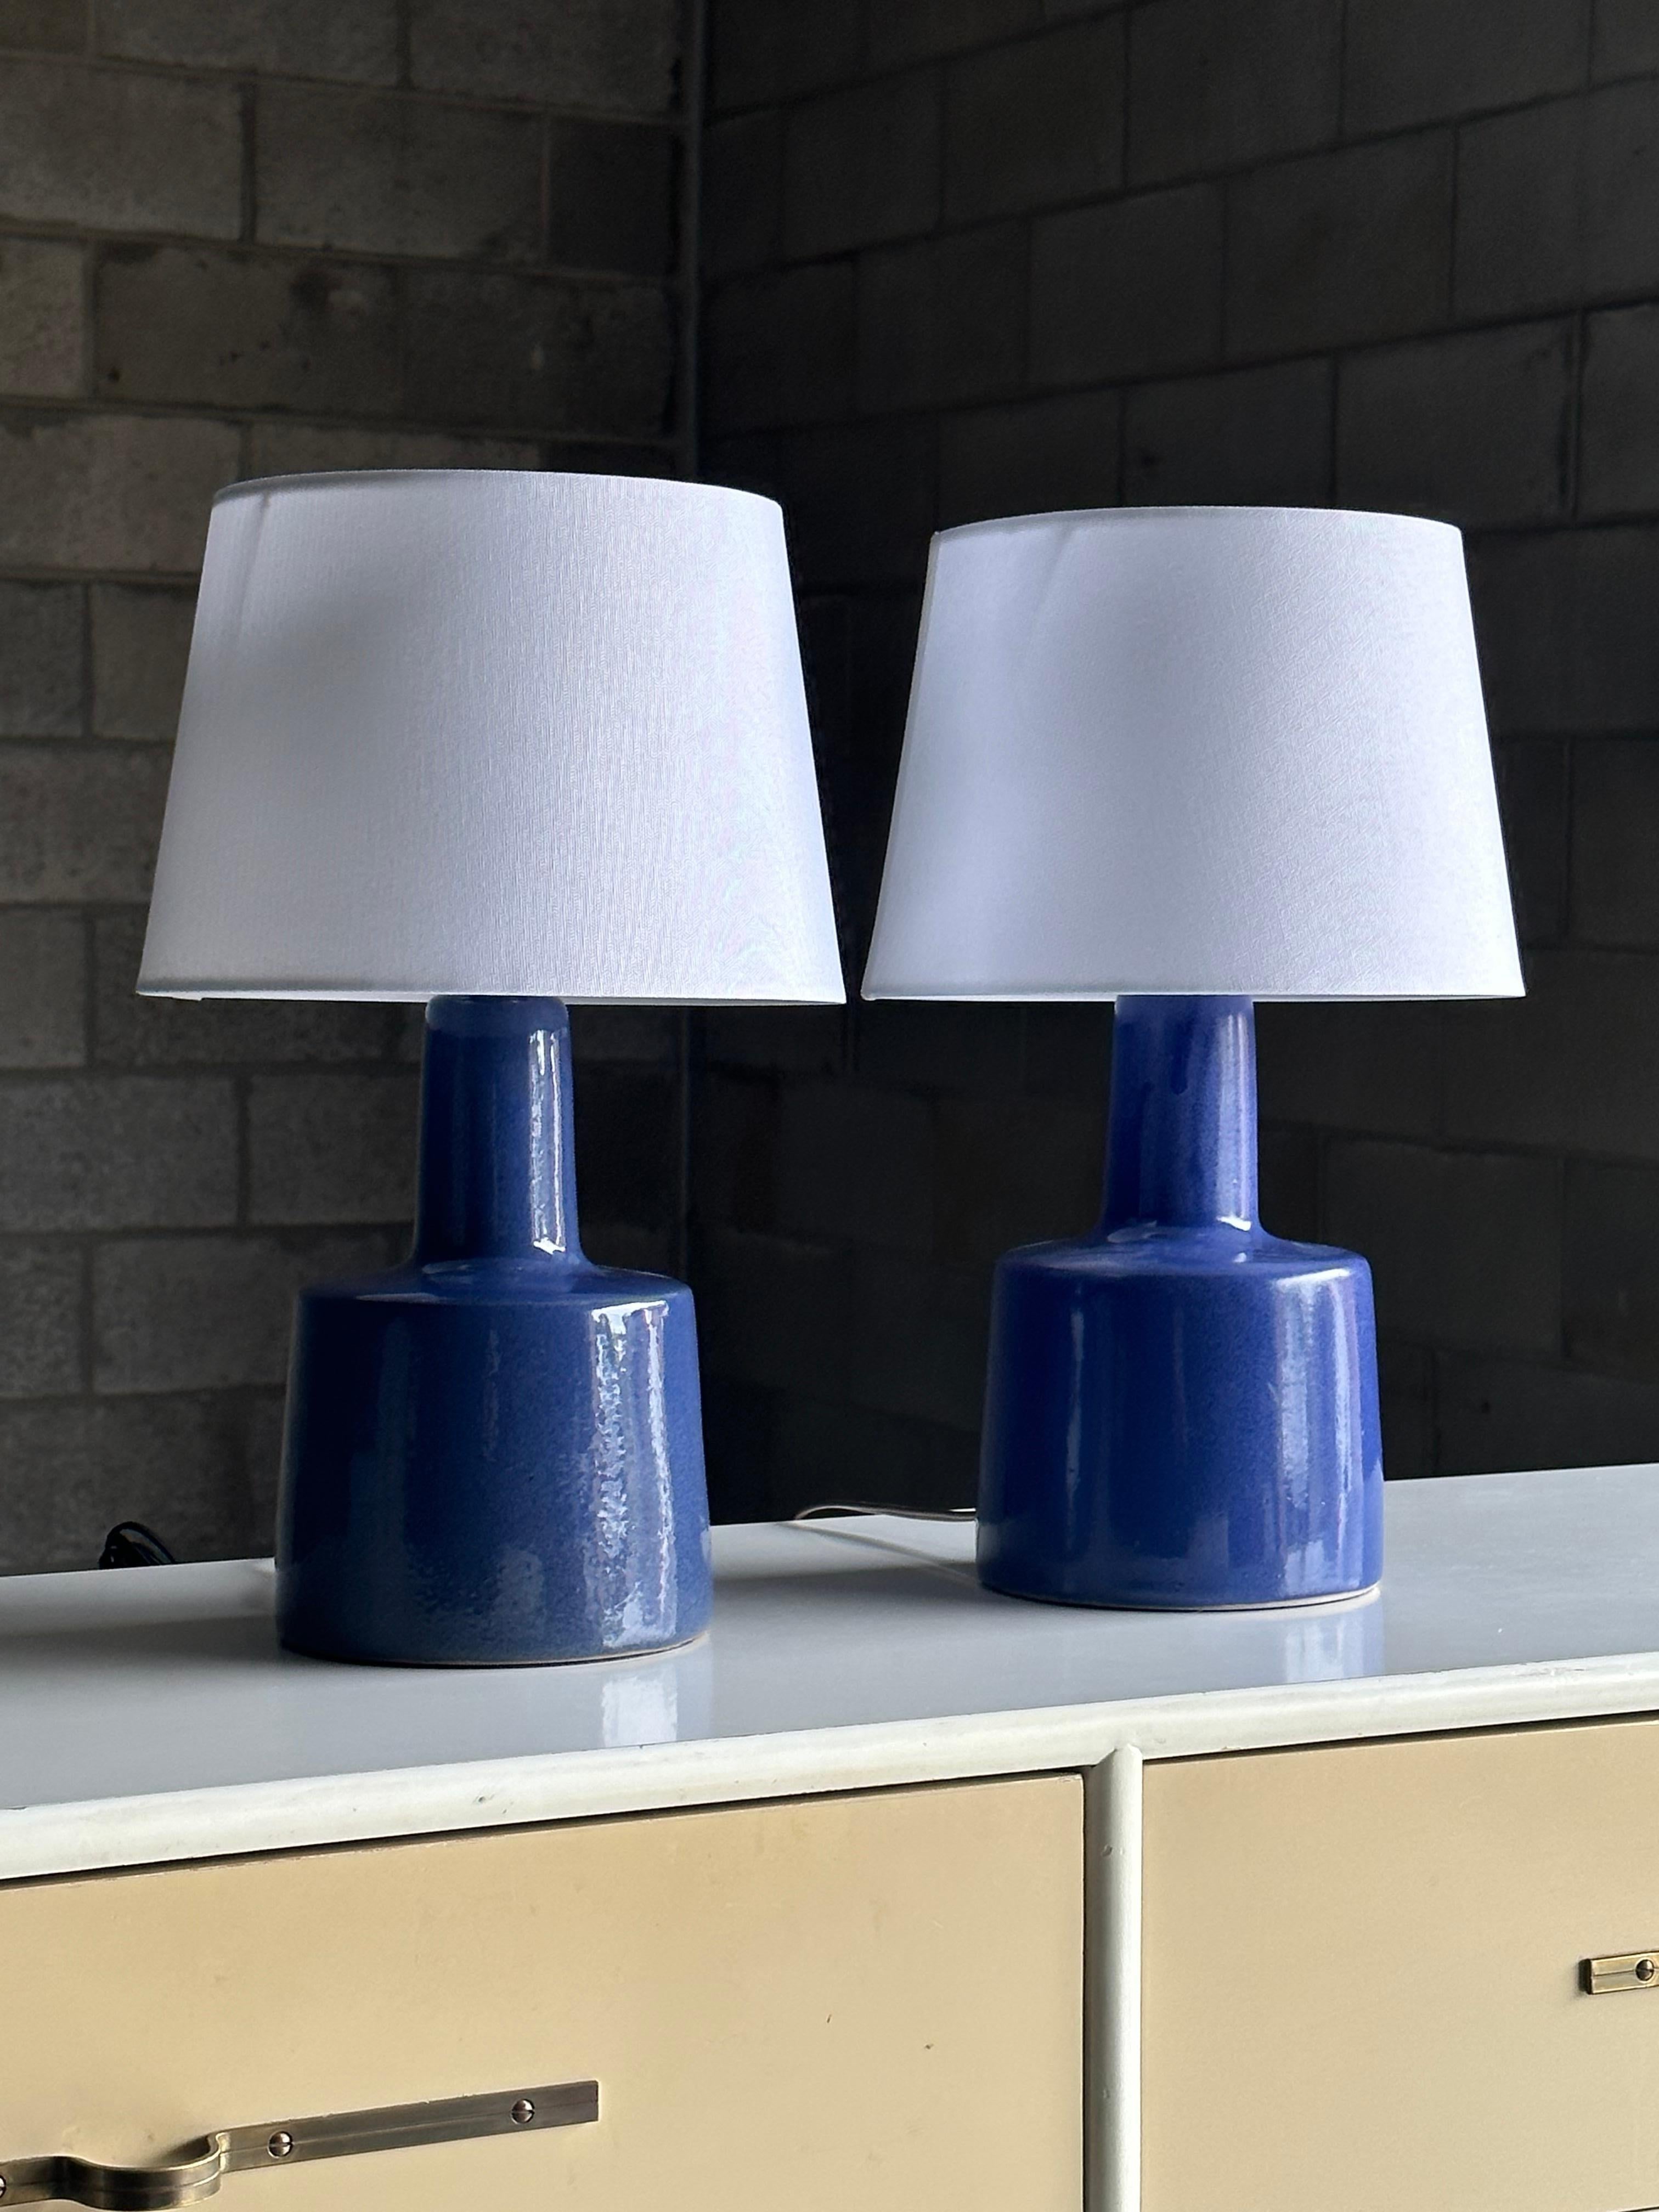 Table lamps designed by ceramicist duo Jane and Gordon Martz for Marshall Studios. Color is royal blue. Please note these are not an exact color match, they are exceptionally close in color as can be seen, but were made years apart, as such the